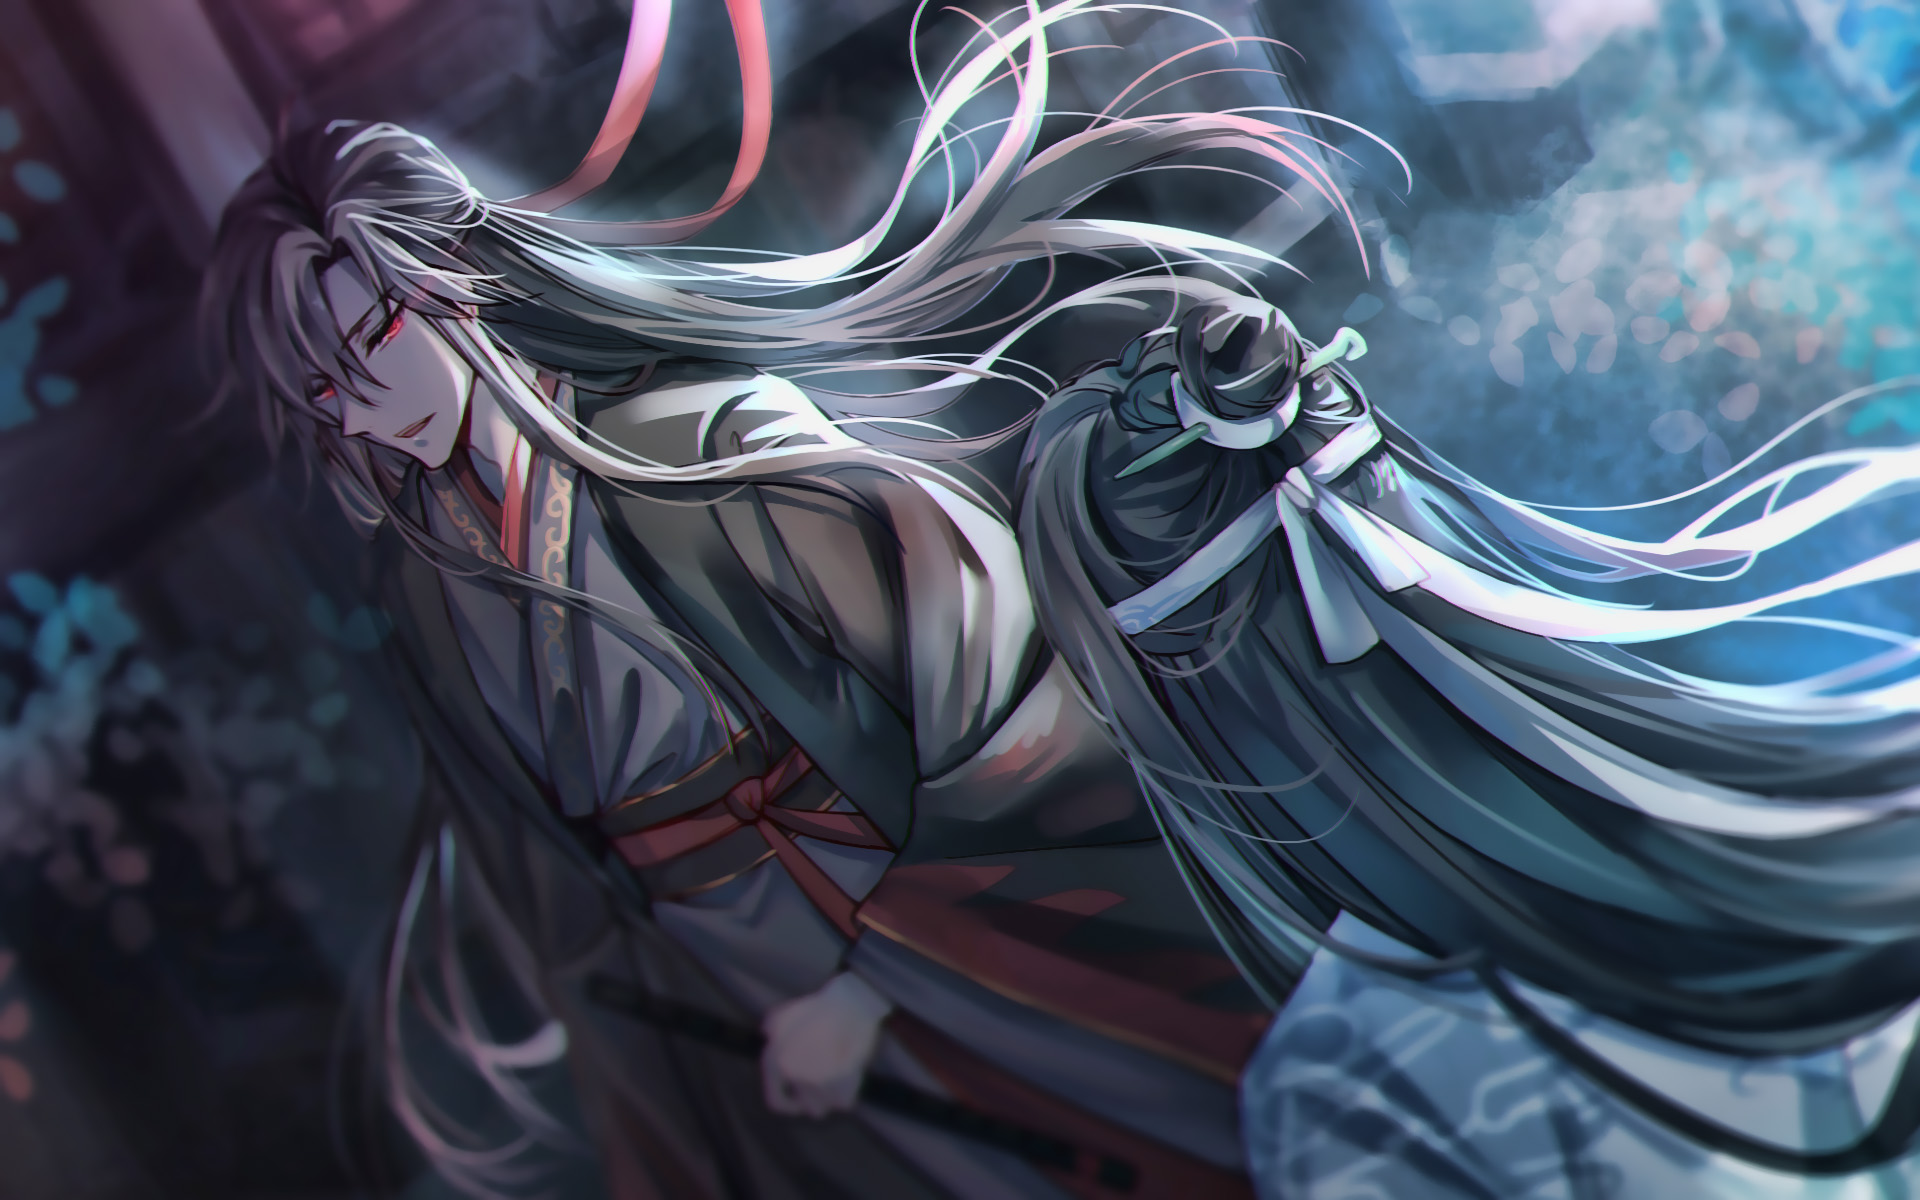 Mo Dao Zu Shi Art Resolution HD Anime 4K Images Ph iPhone Wallpapers  Free Download